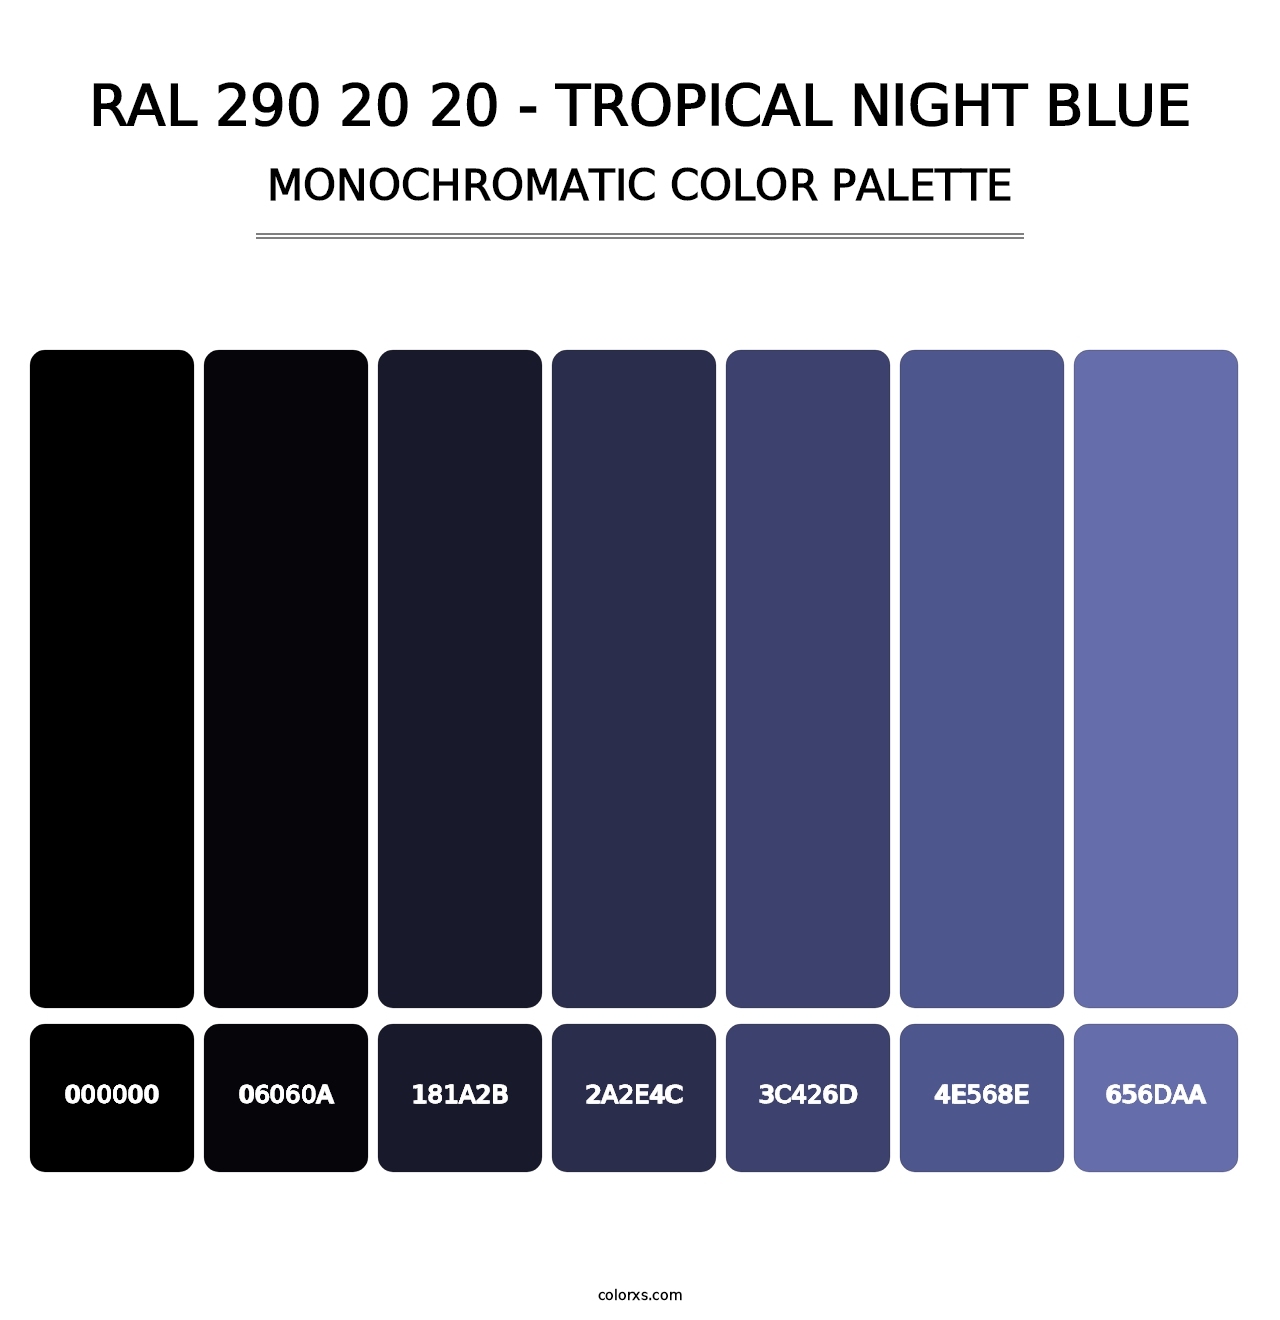 RAL 290 20 20 - Tropical Night Blue - Monochromatic Color Palette